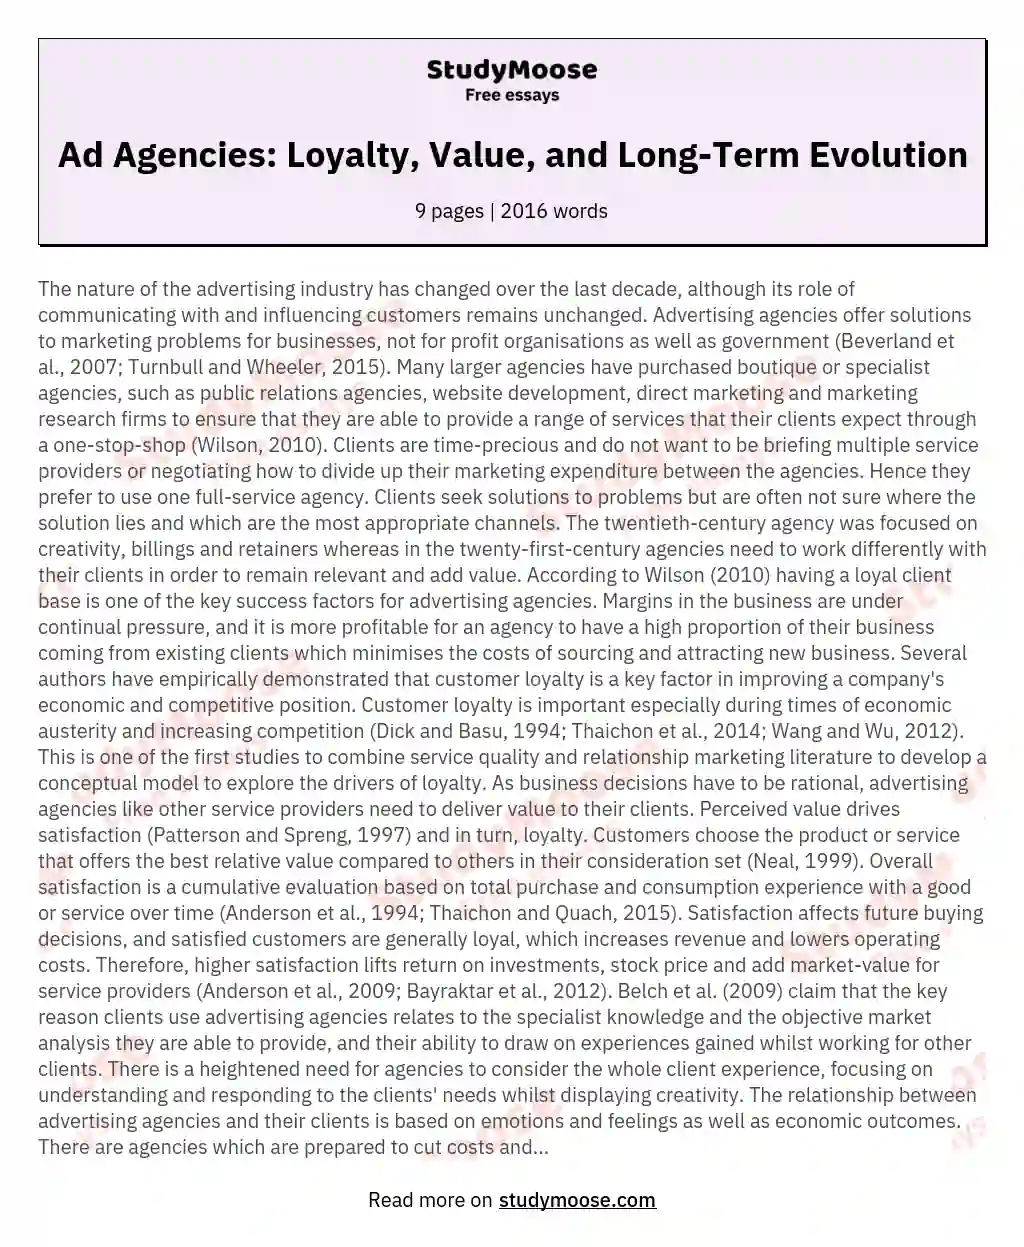 Ad Agencies: Loyalty, Value, and Long-Term Evolution essay